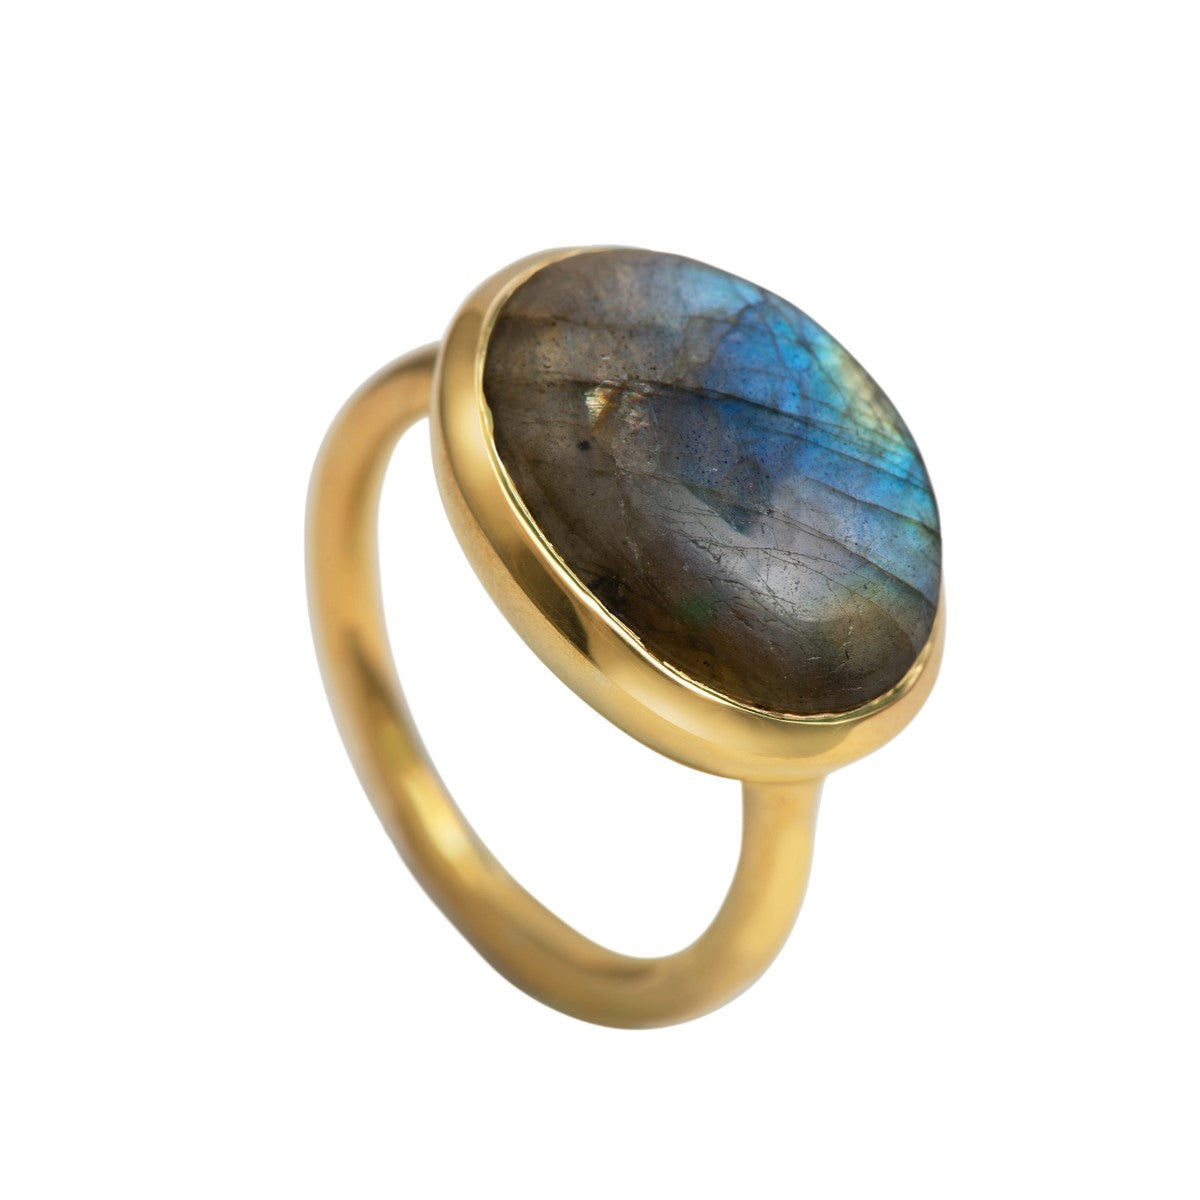 Cabochon Oval Cut Natural Gemstone Gold Plated Sterling Silver Ring - Labradorite